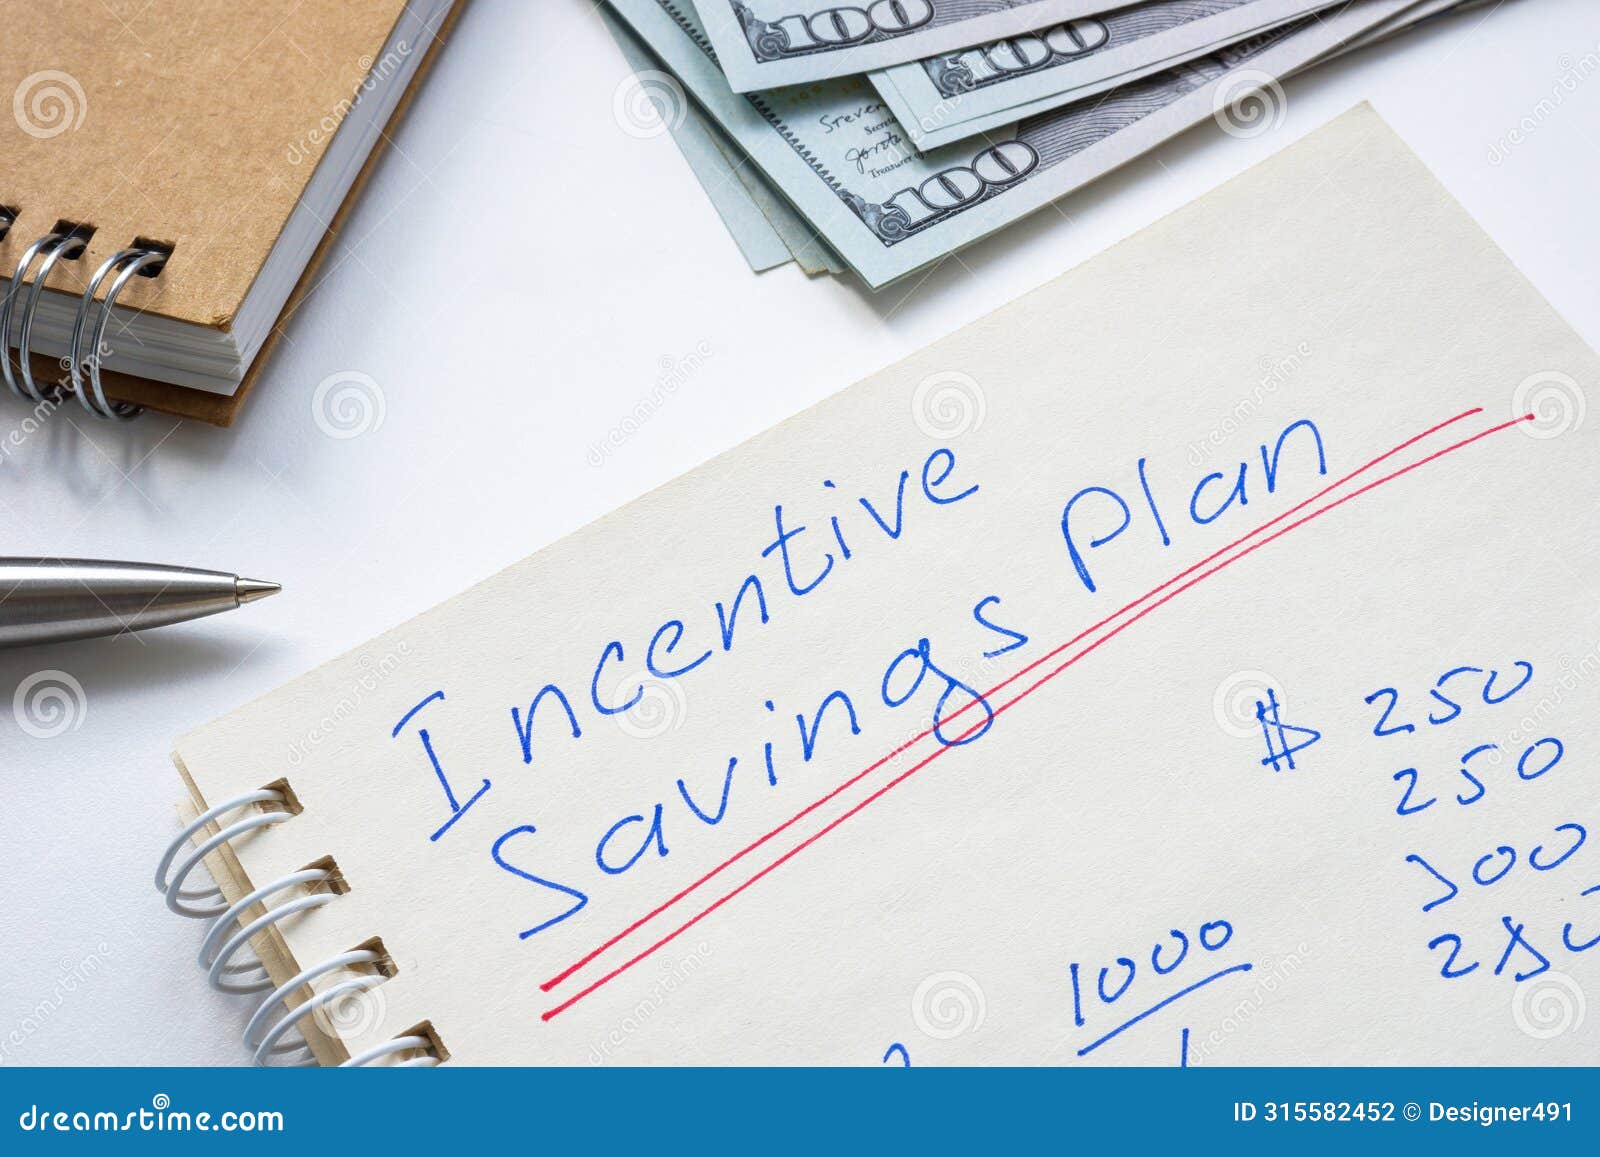 handwritten incentive savings plan in the notepad.